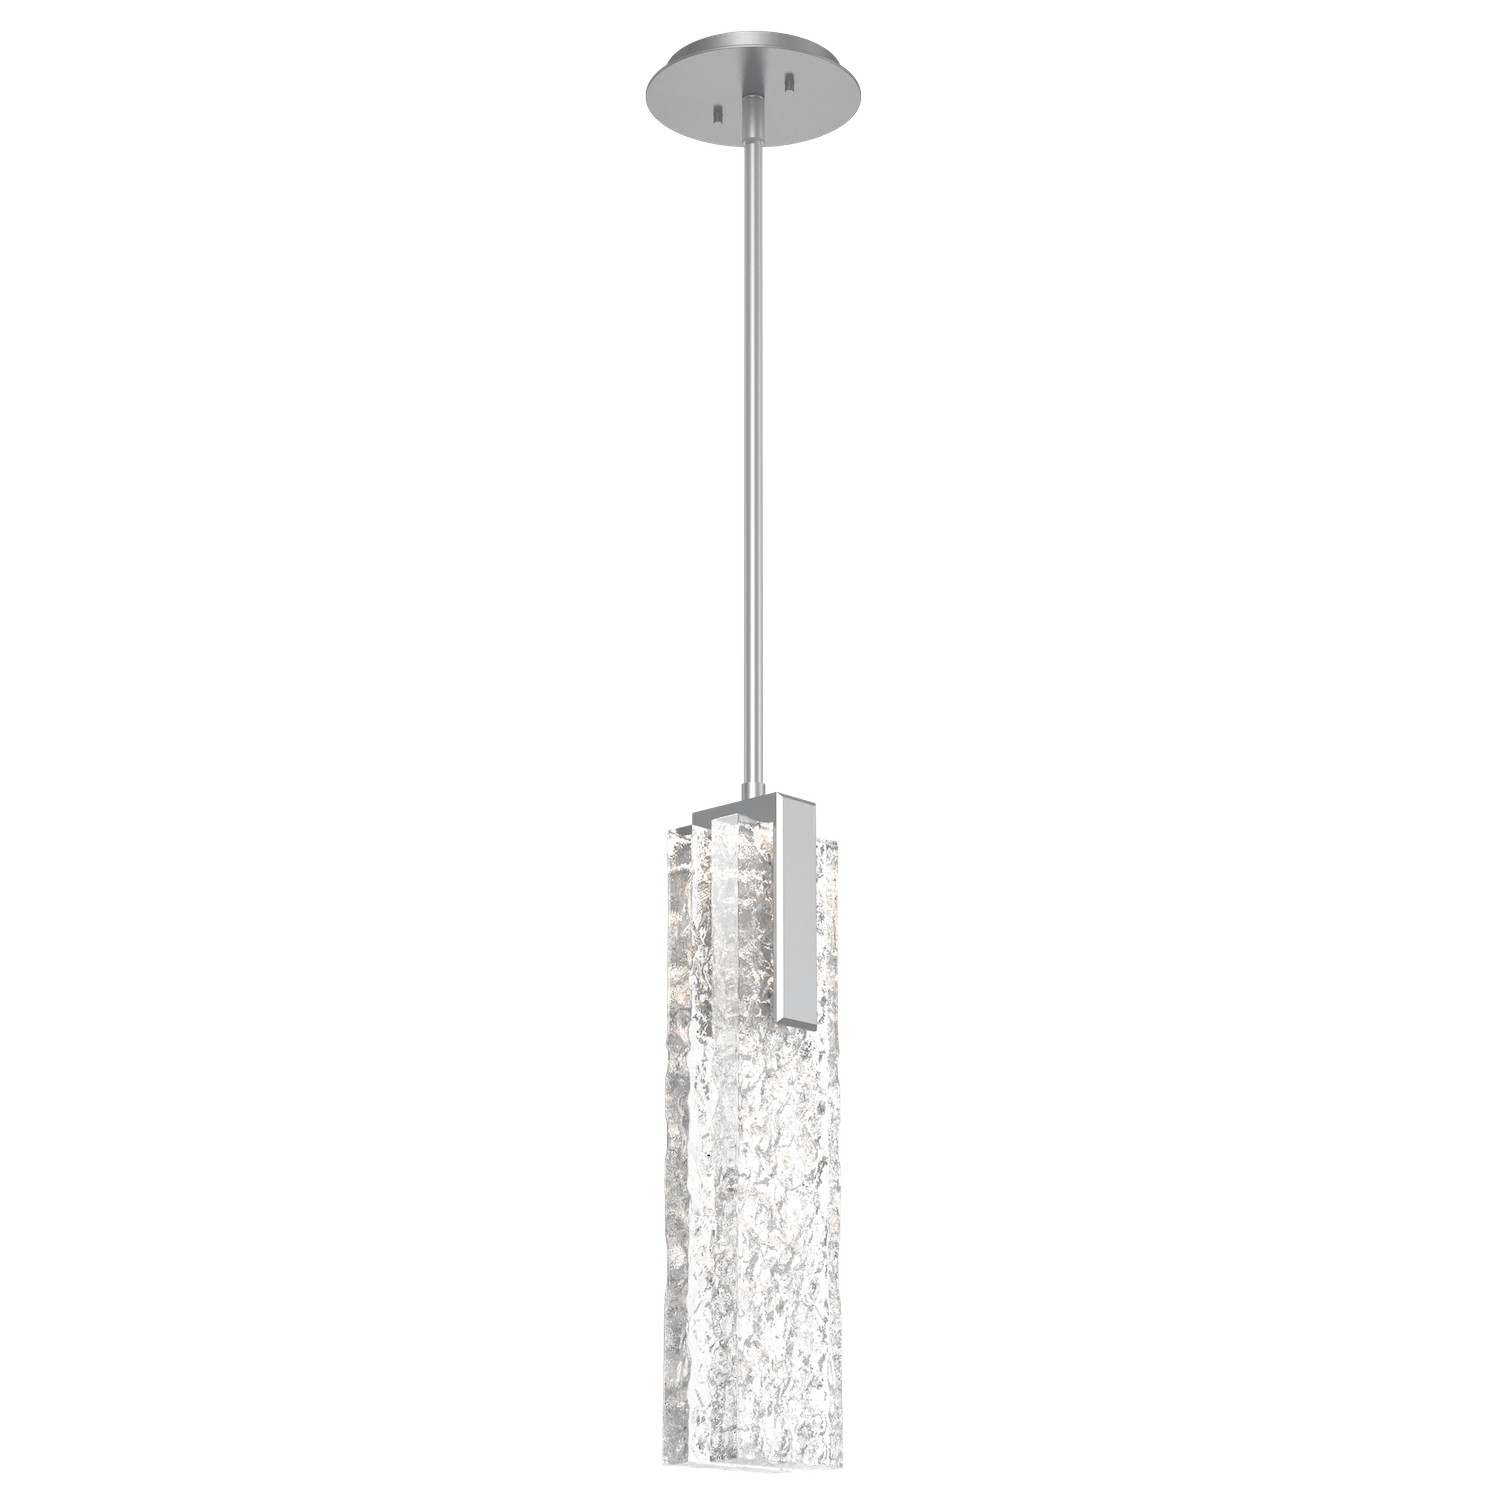 LAB0061-17-CS-GC-Hammerton-Studio-Glacier-pendant-light-with-classic-silver-finish-and-clear-blown-glass-with-geo-clear-cast-glass-diffusers-and-LED-lamping